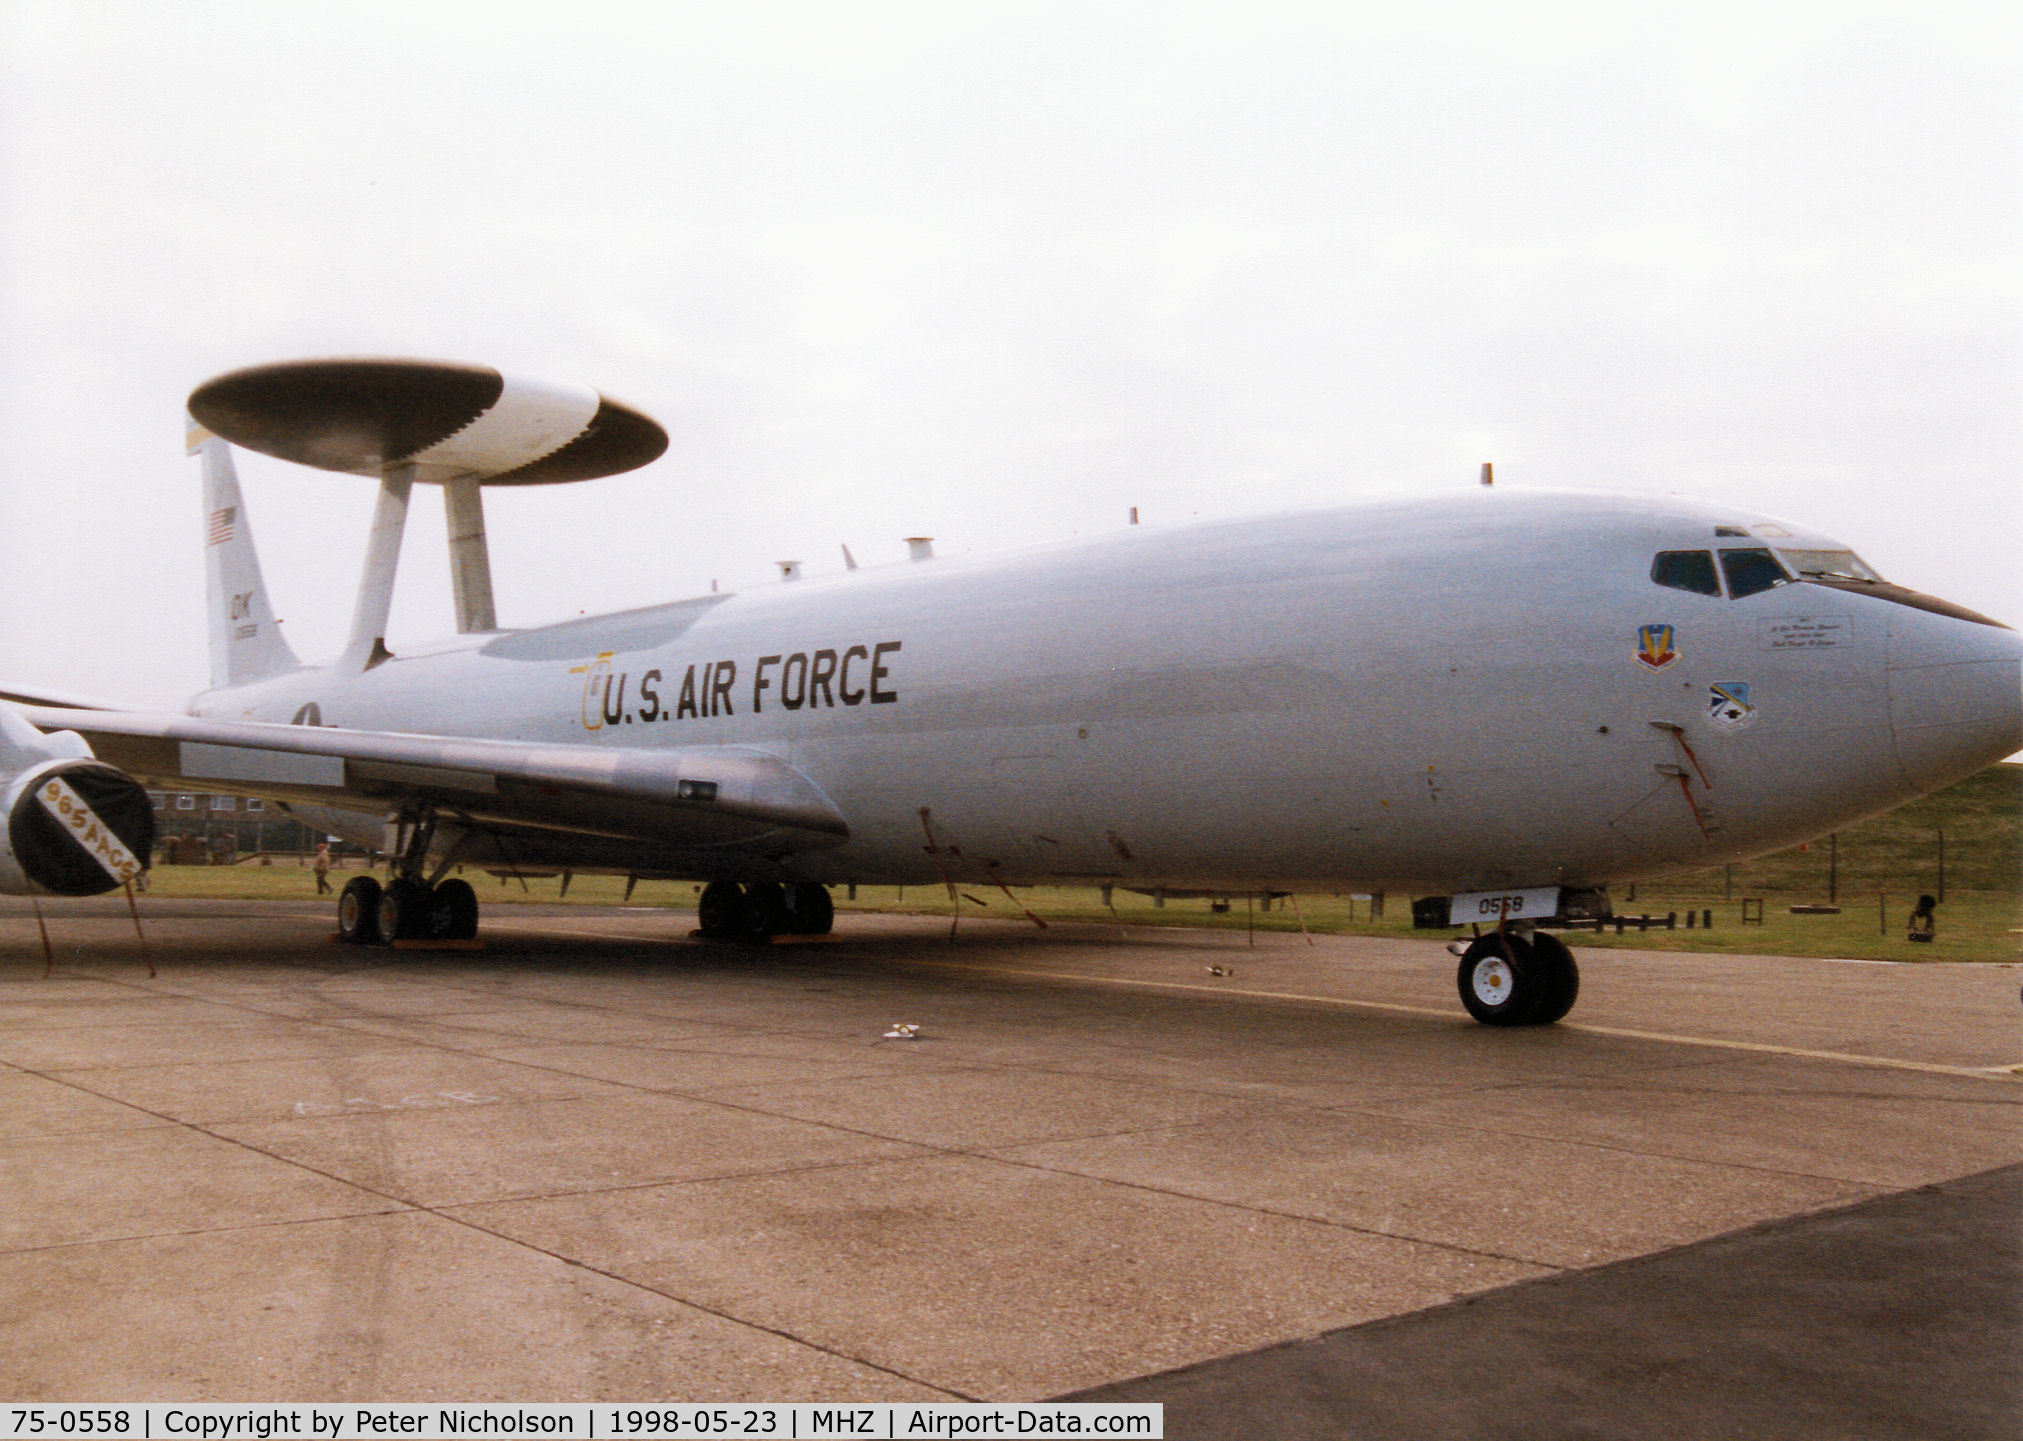 75-0558, 1975 Boeing E-3B (707) Sentry C/N 21208, E-3B Sentry of the 965th Airborne Air Control Squadron/552nd Air Control Wing on display at the 1998 RAF Mildenhall Air Fete.